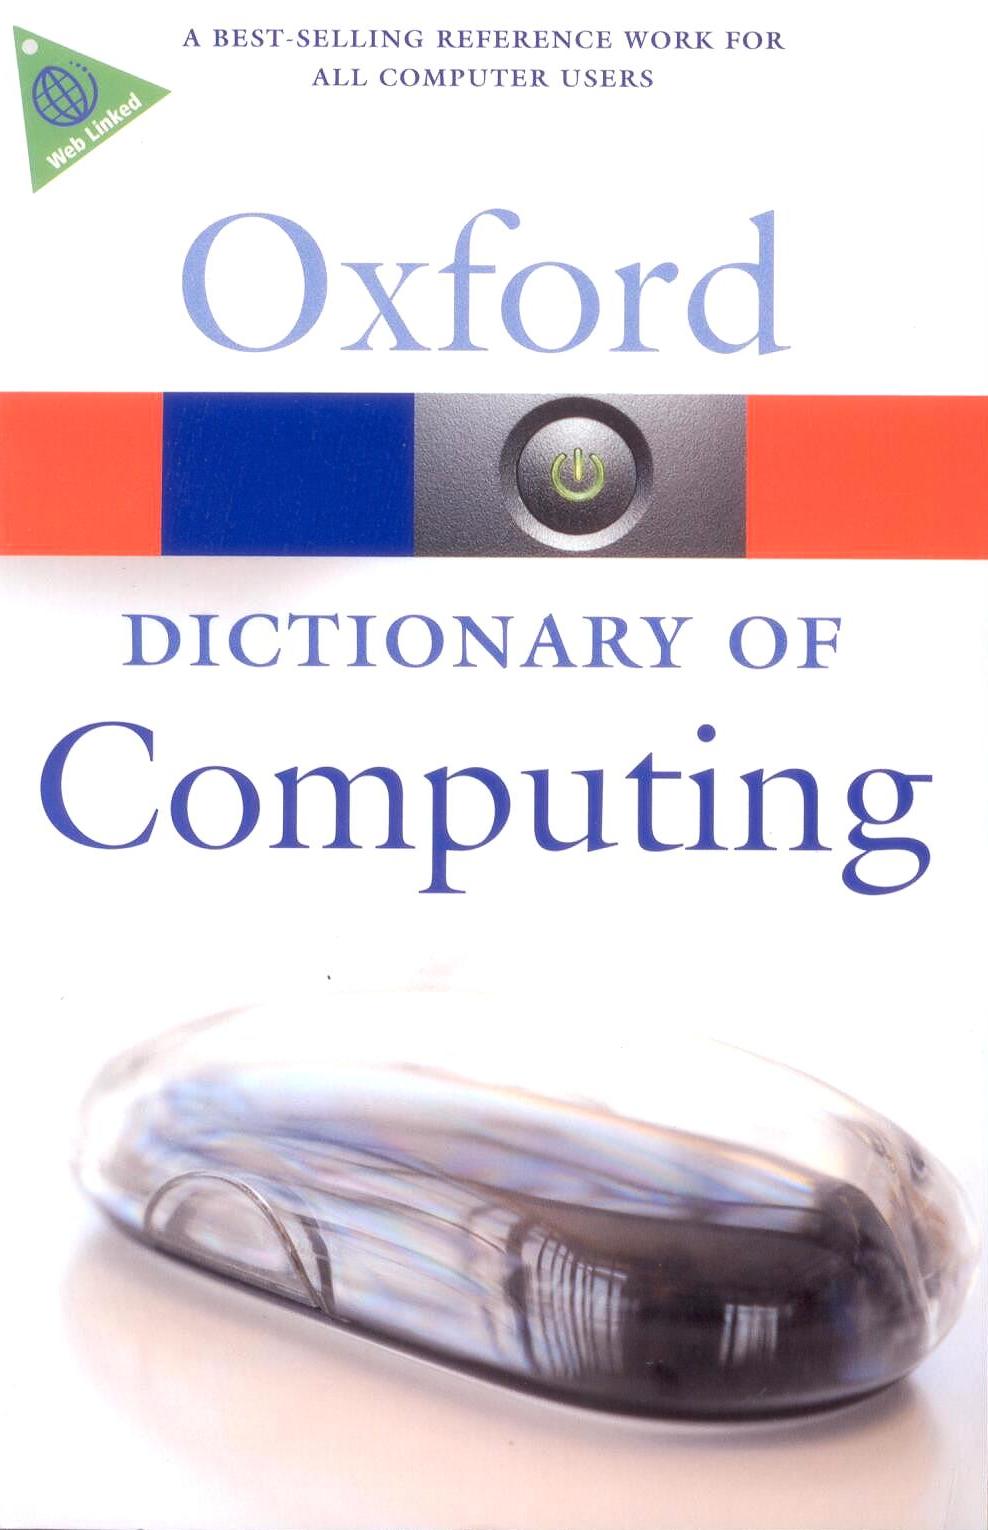 Oxford Dictionary of Computing (6th Edition)